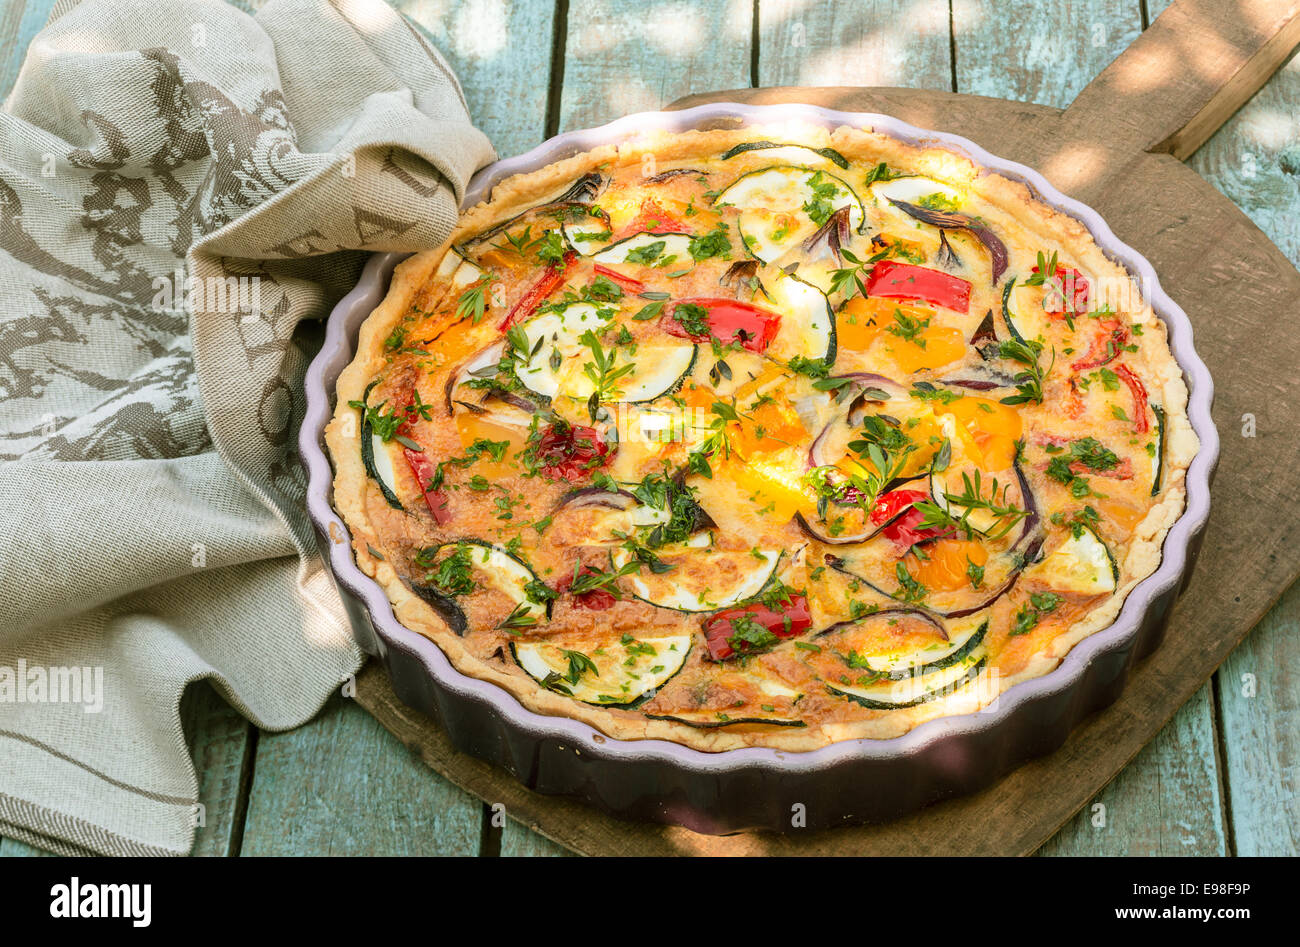 Delicious eggplant savory tart with tomato and fresh herbs in a fluted pie dish served on a wooden board outdoors for a summer picnic Stock Photo